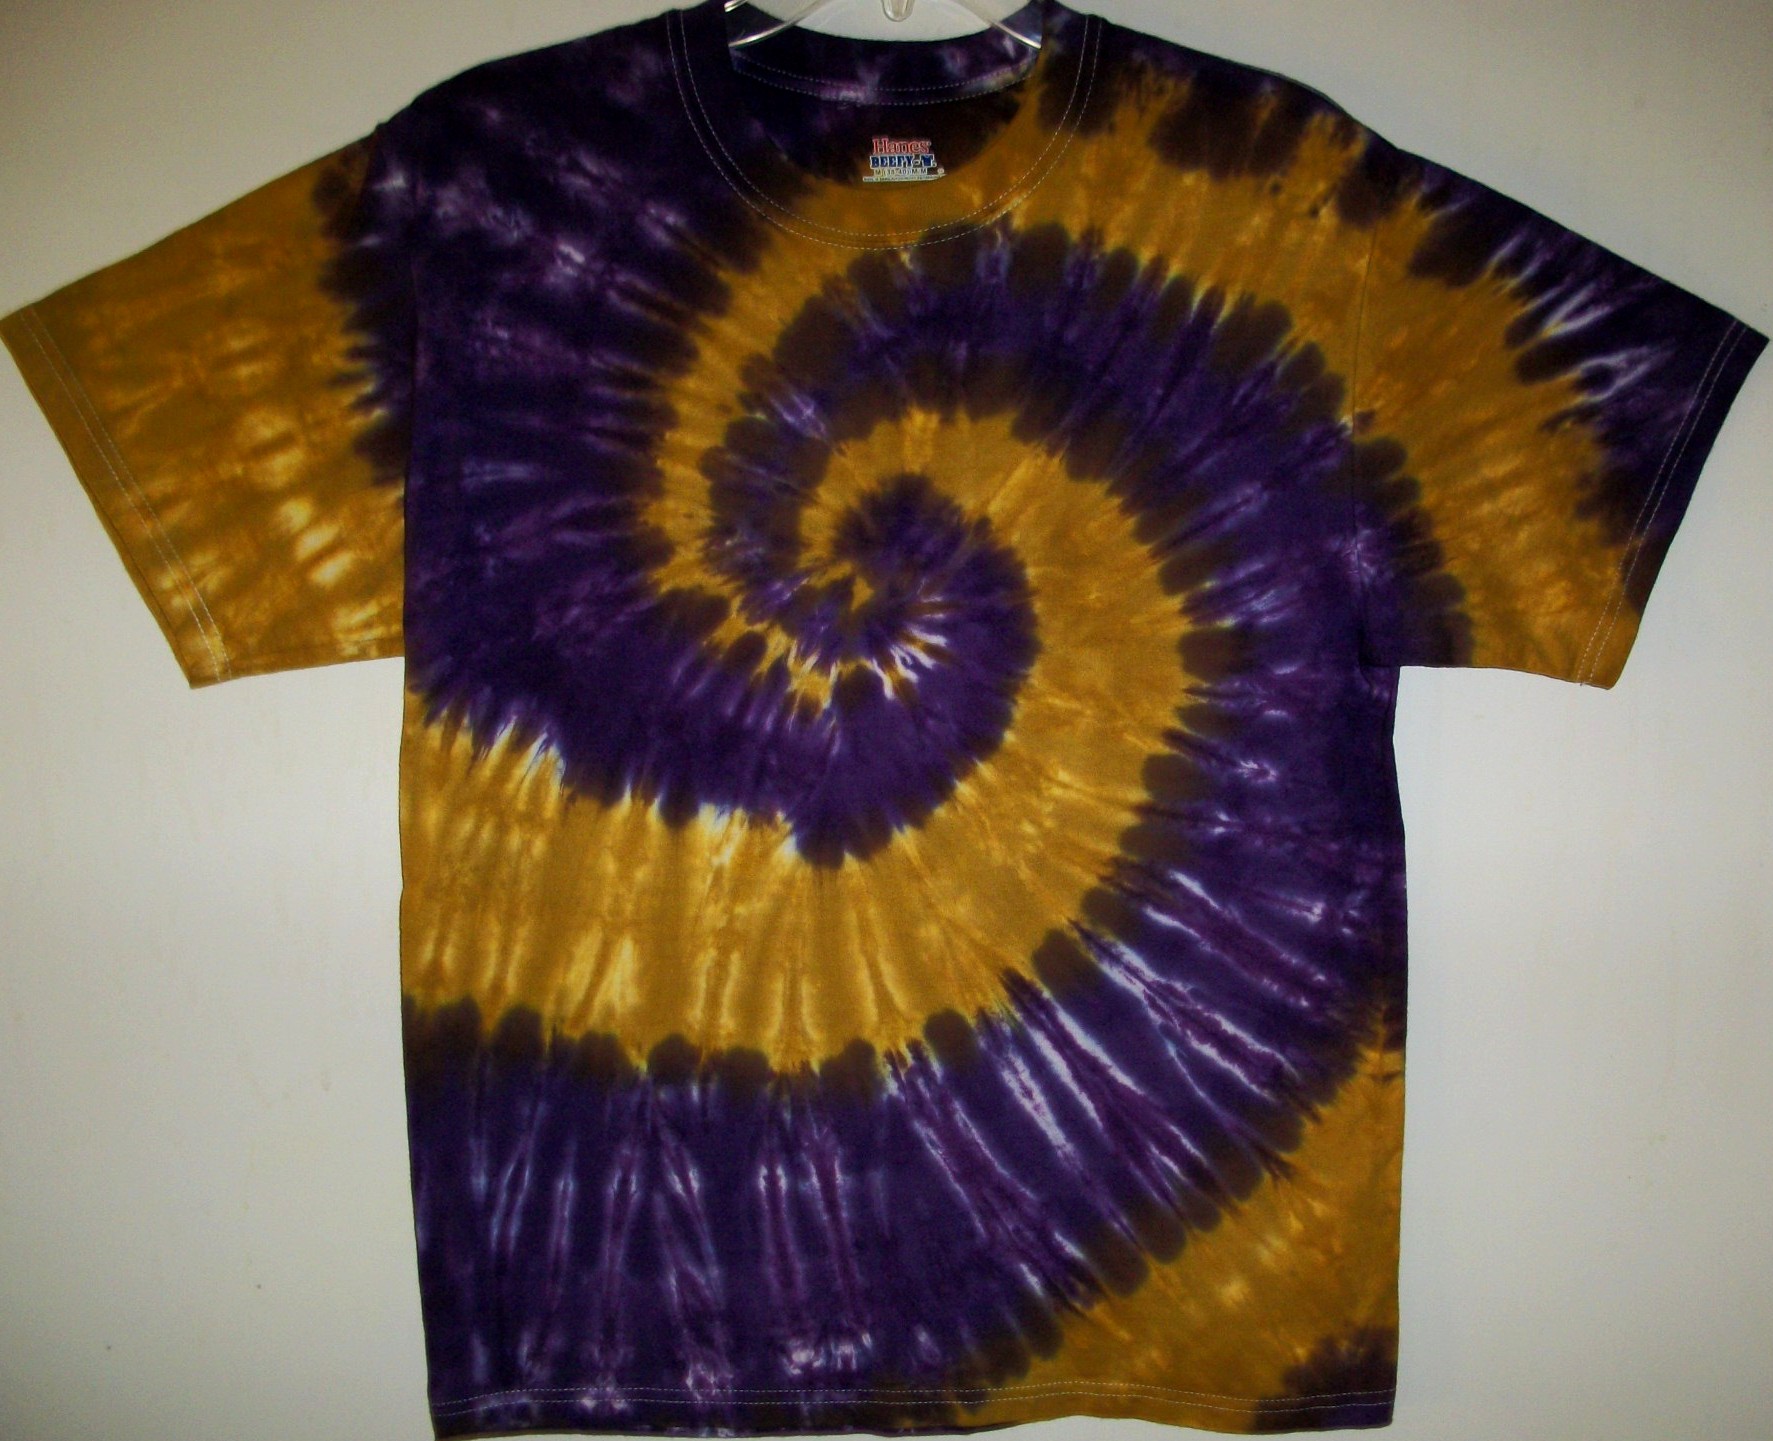  Deep Purple and Gold Spiral Tie-dyed Tees